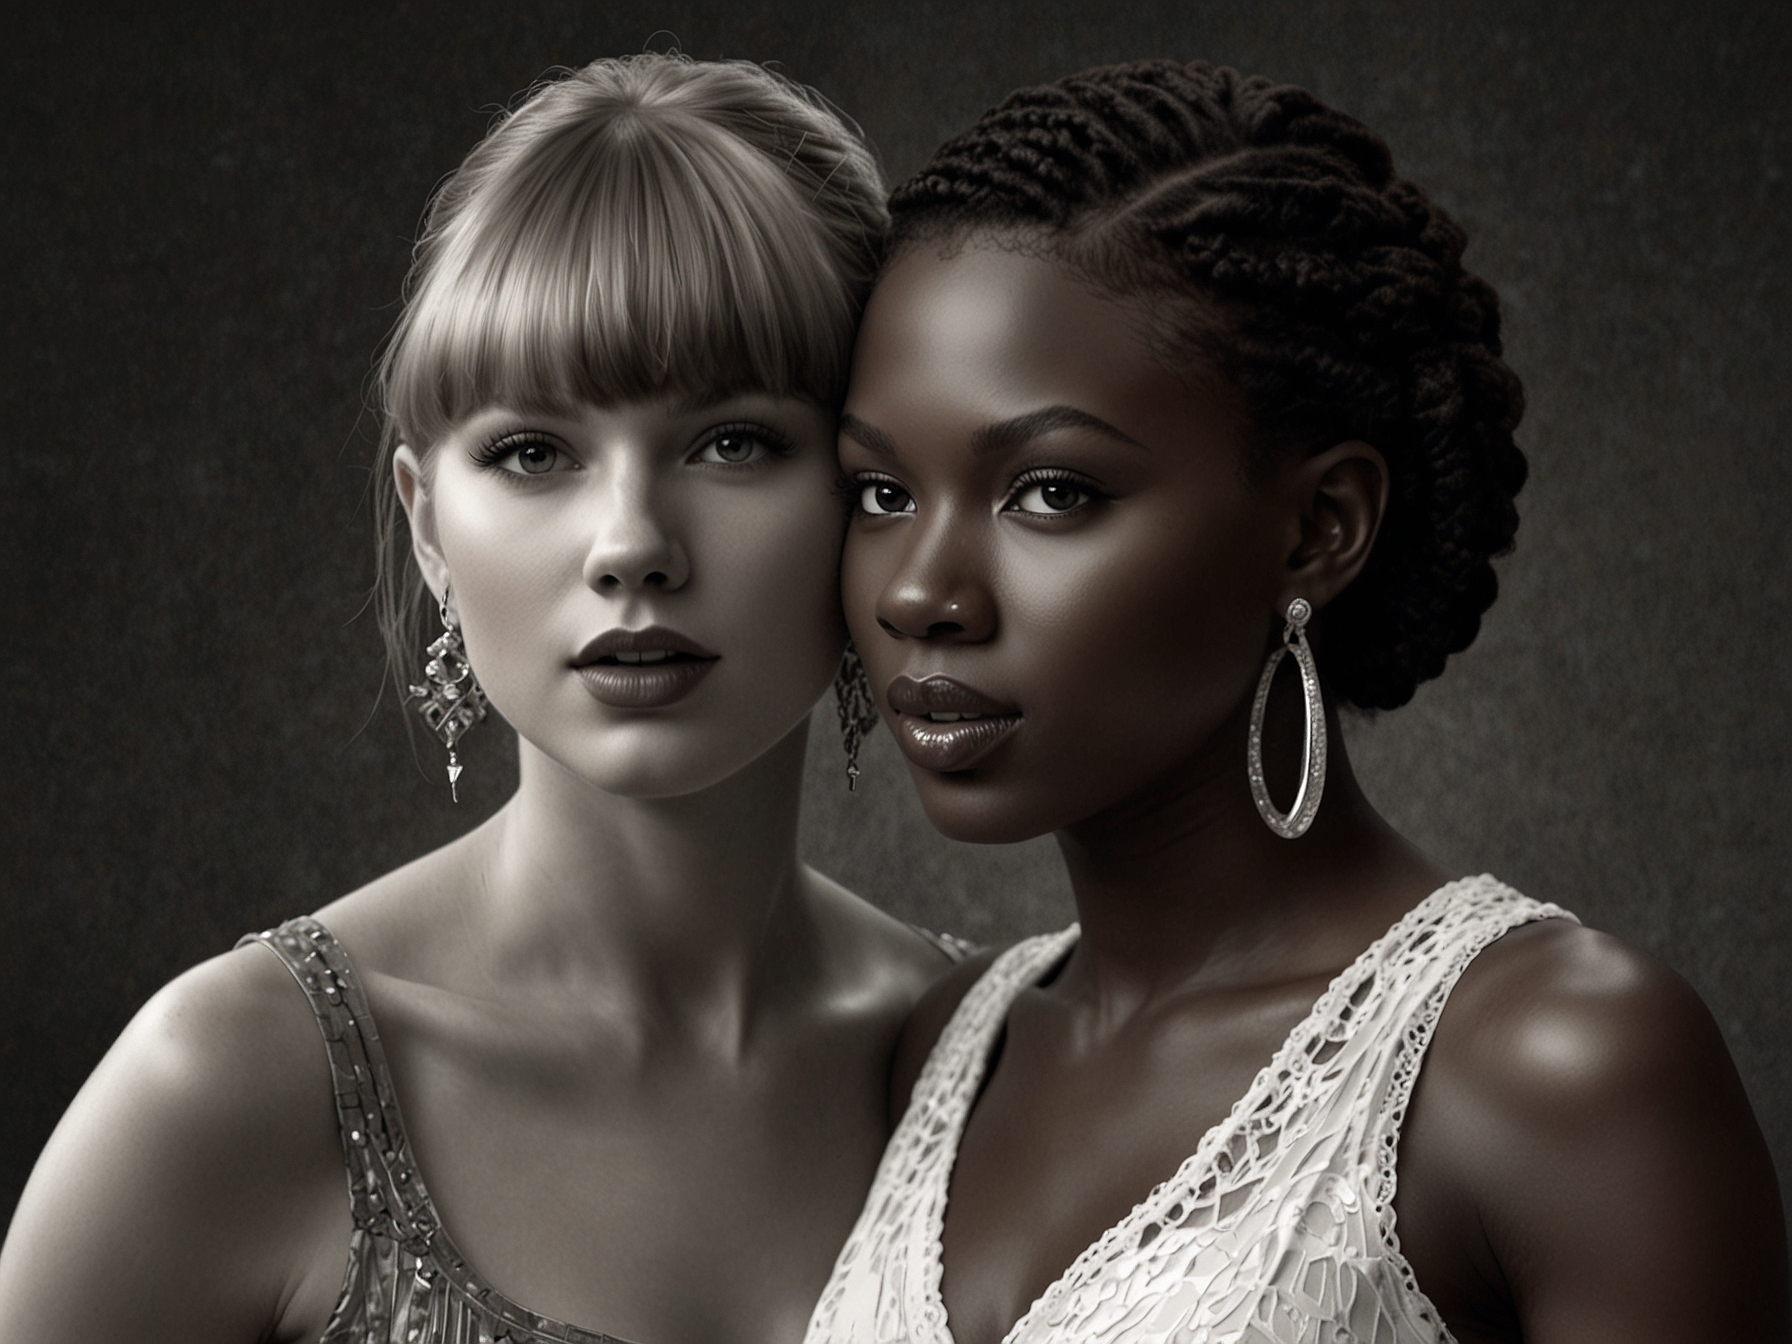 Lupita Nyong’o and Taylor Swift, representing a moment of collaboration and mutual respect, contribute to the artistic vision of 'Little Monsters,' blending film and music seamlessly.